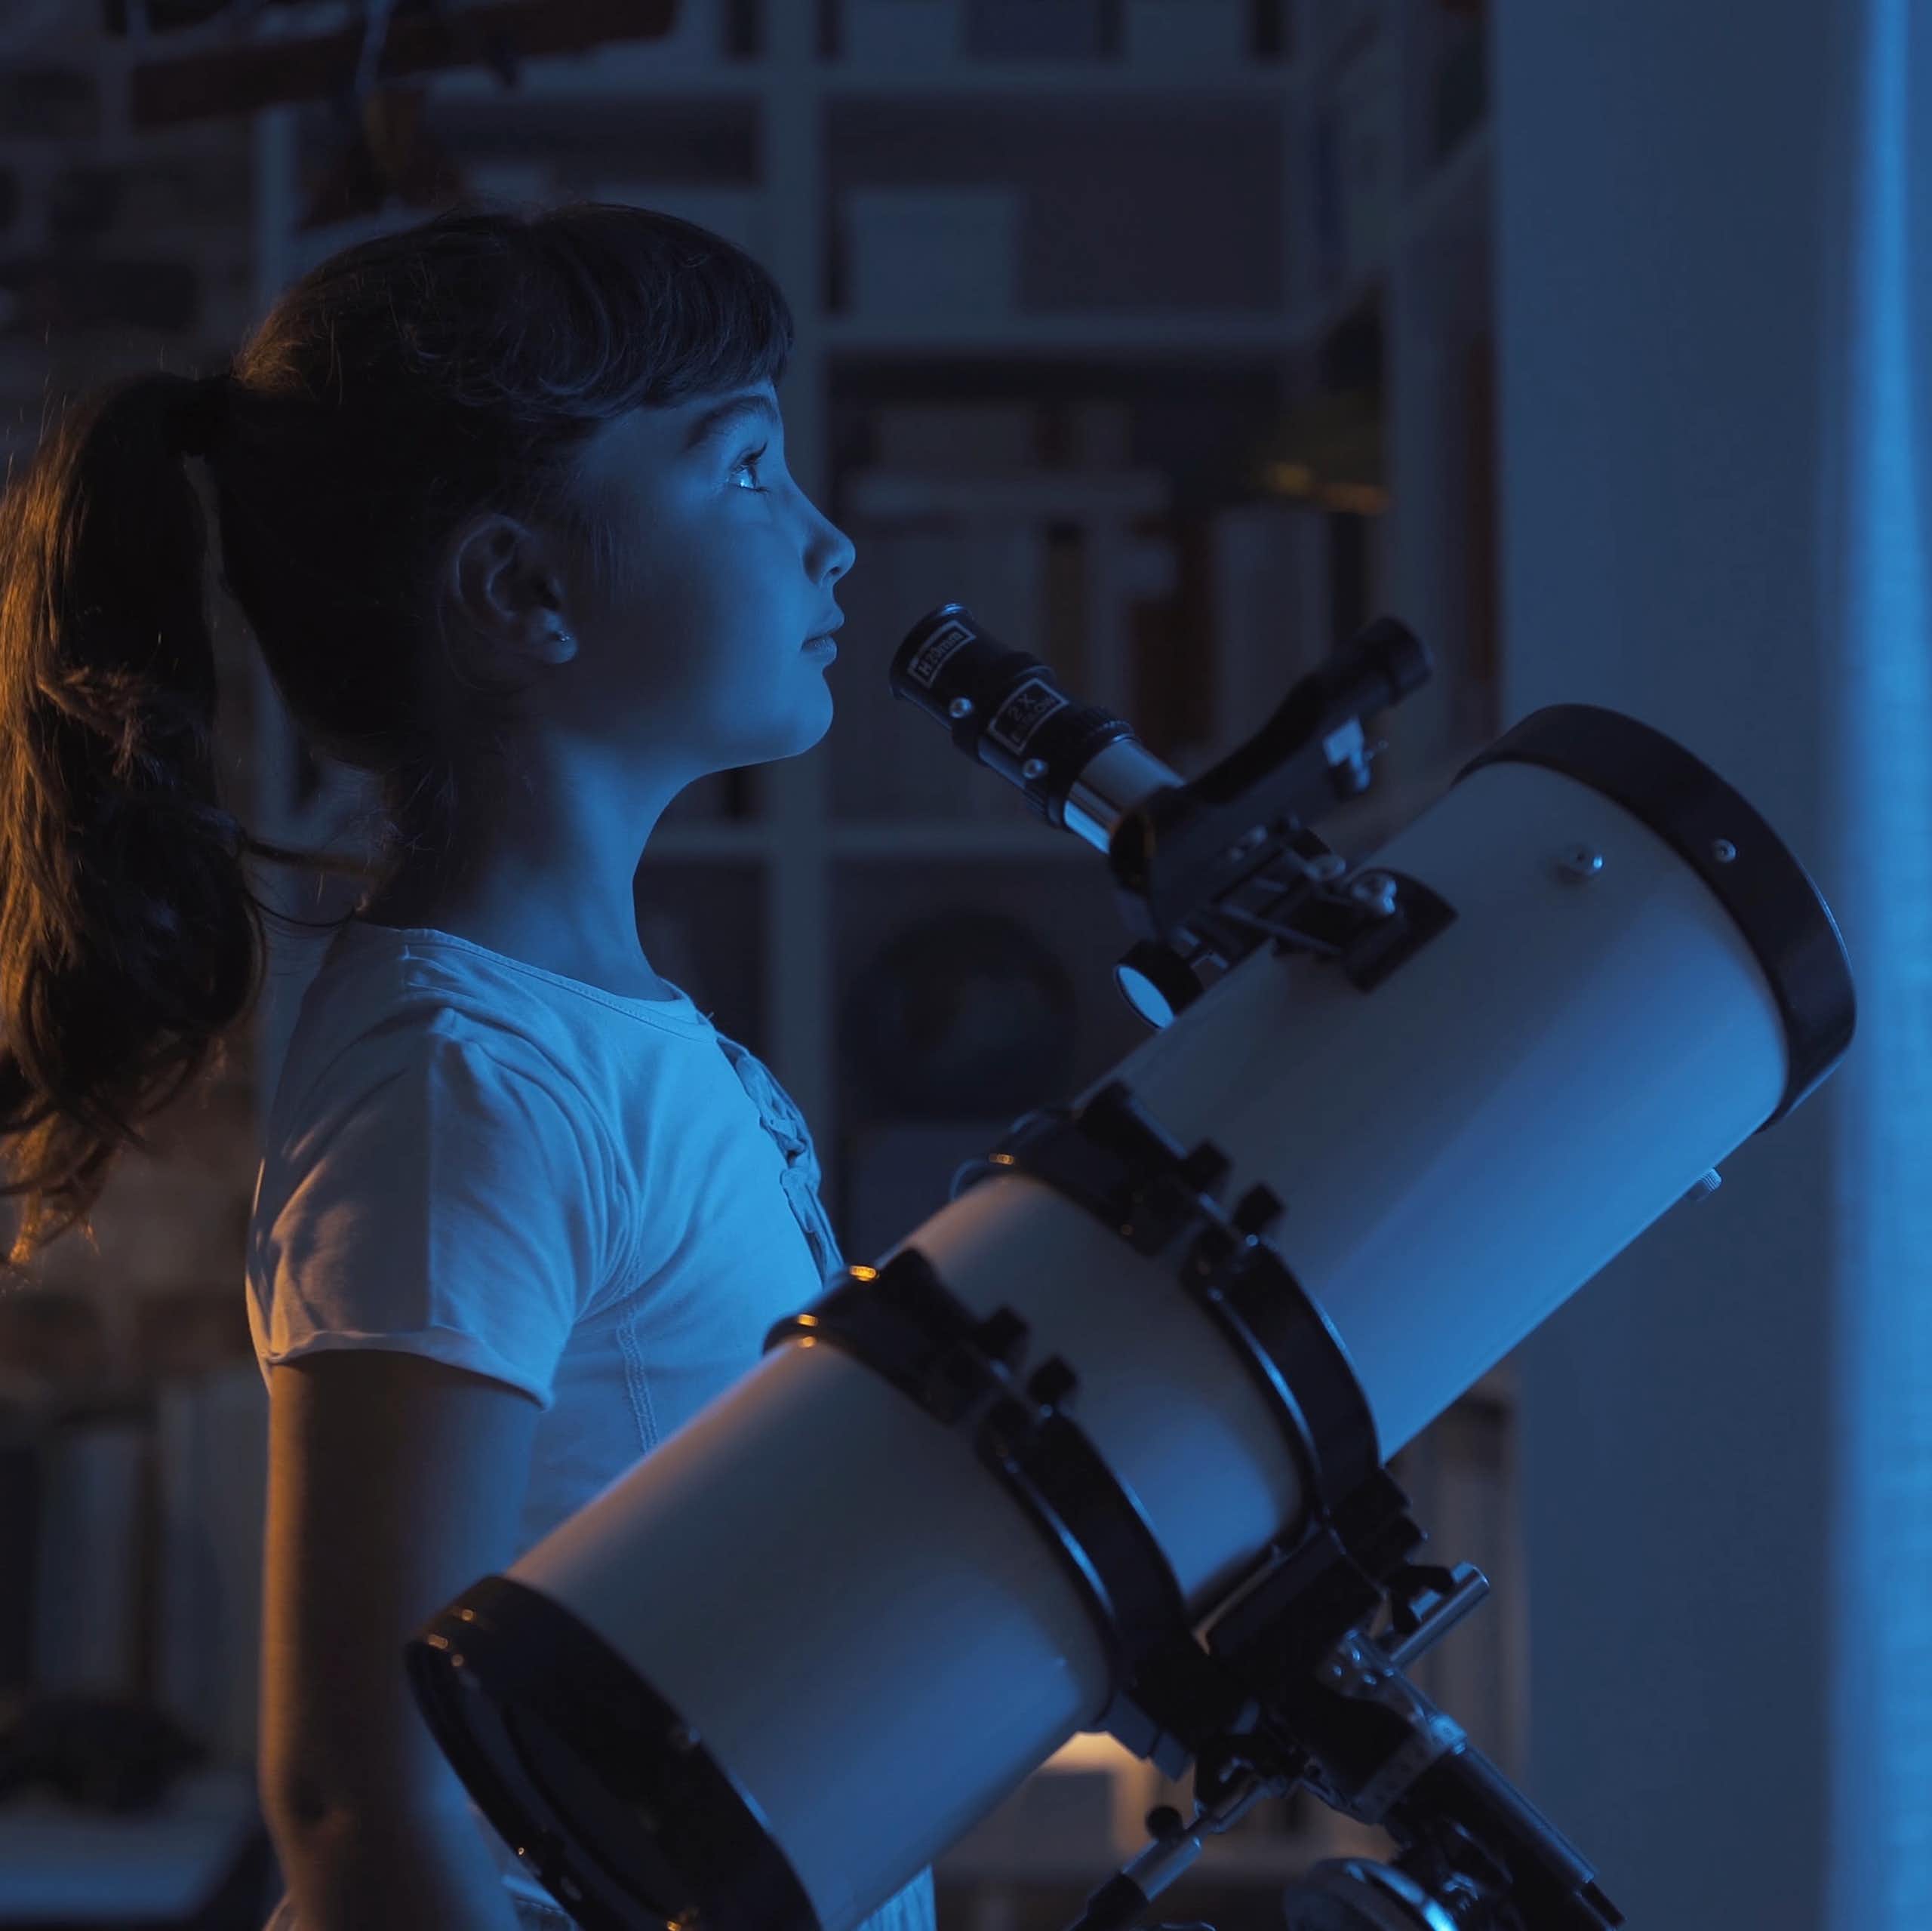 Girl standing by telescope looking out of window at night